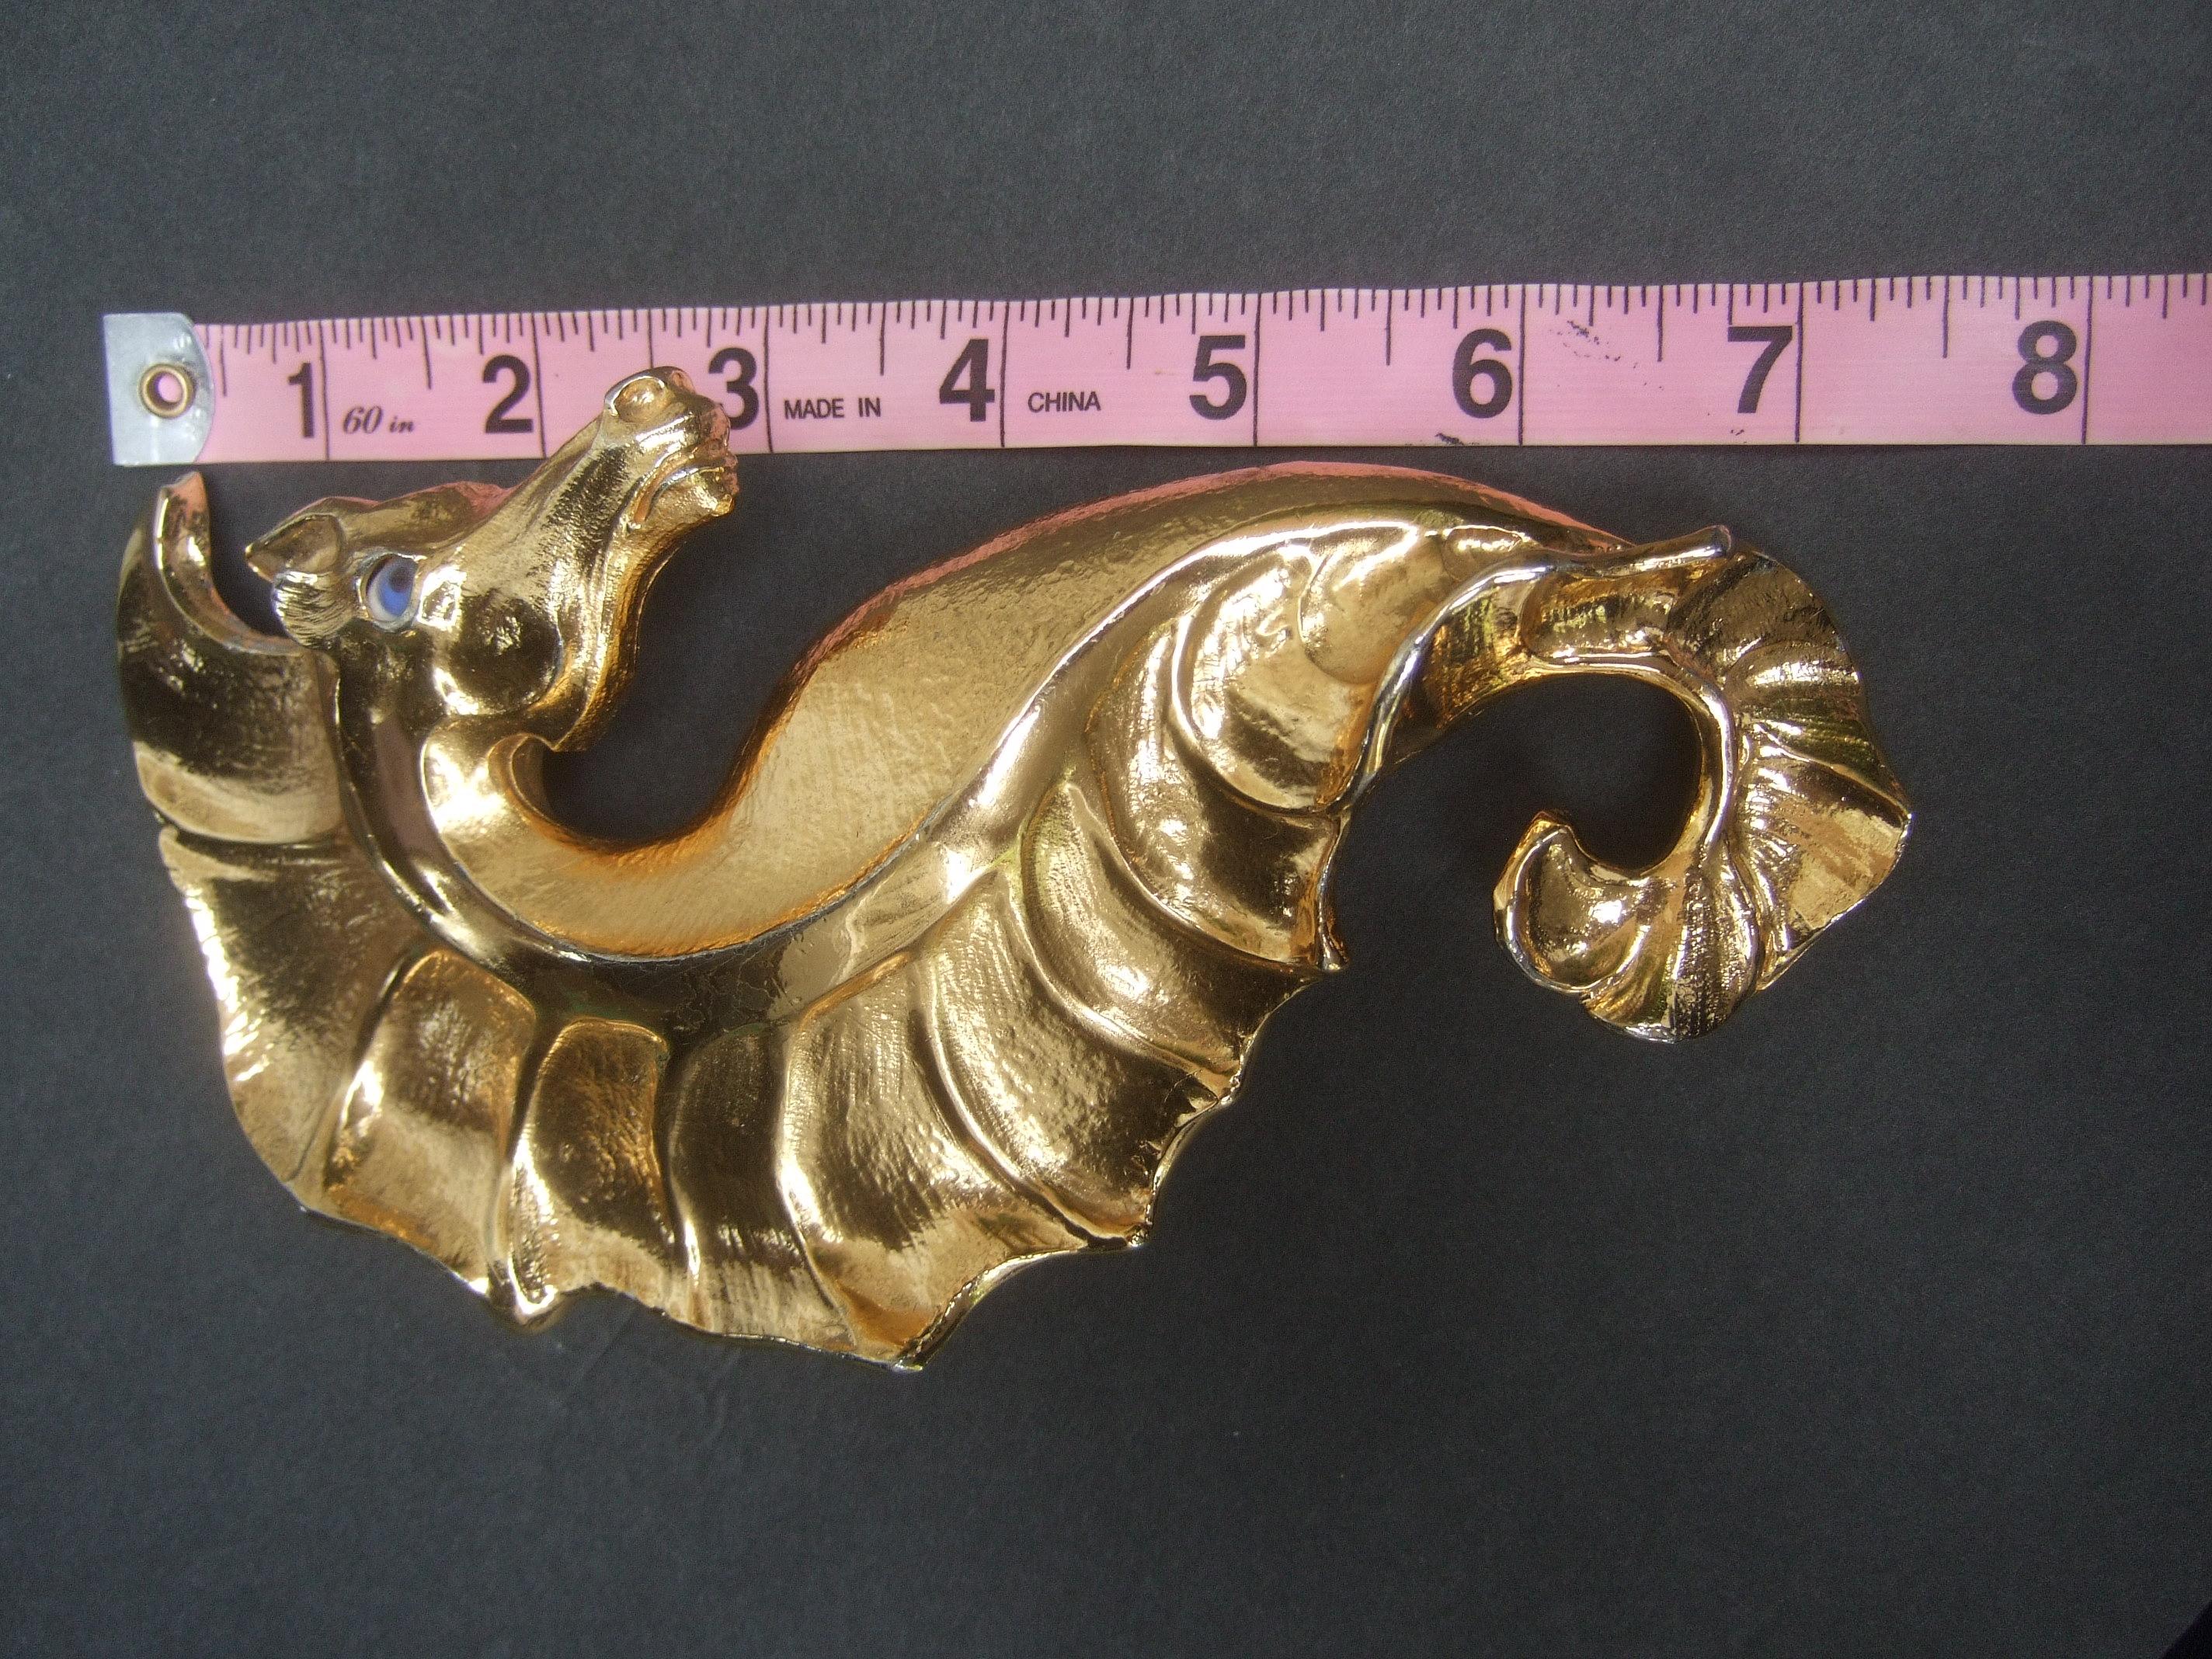 Christopher Ross Rare Massive 24k Gold Plated Seahorse Belt Buckle c 1980s For Sale 4